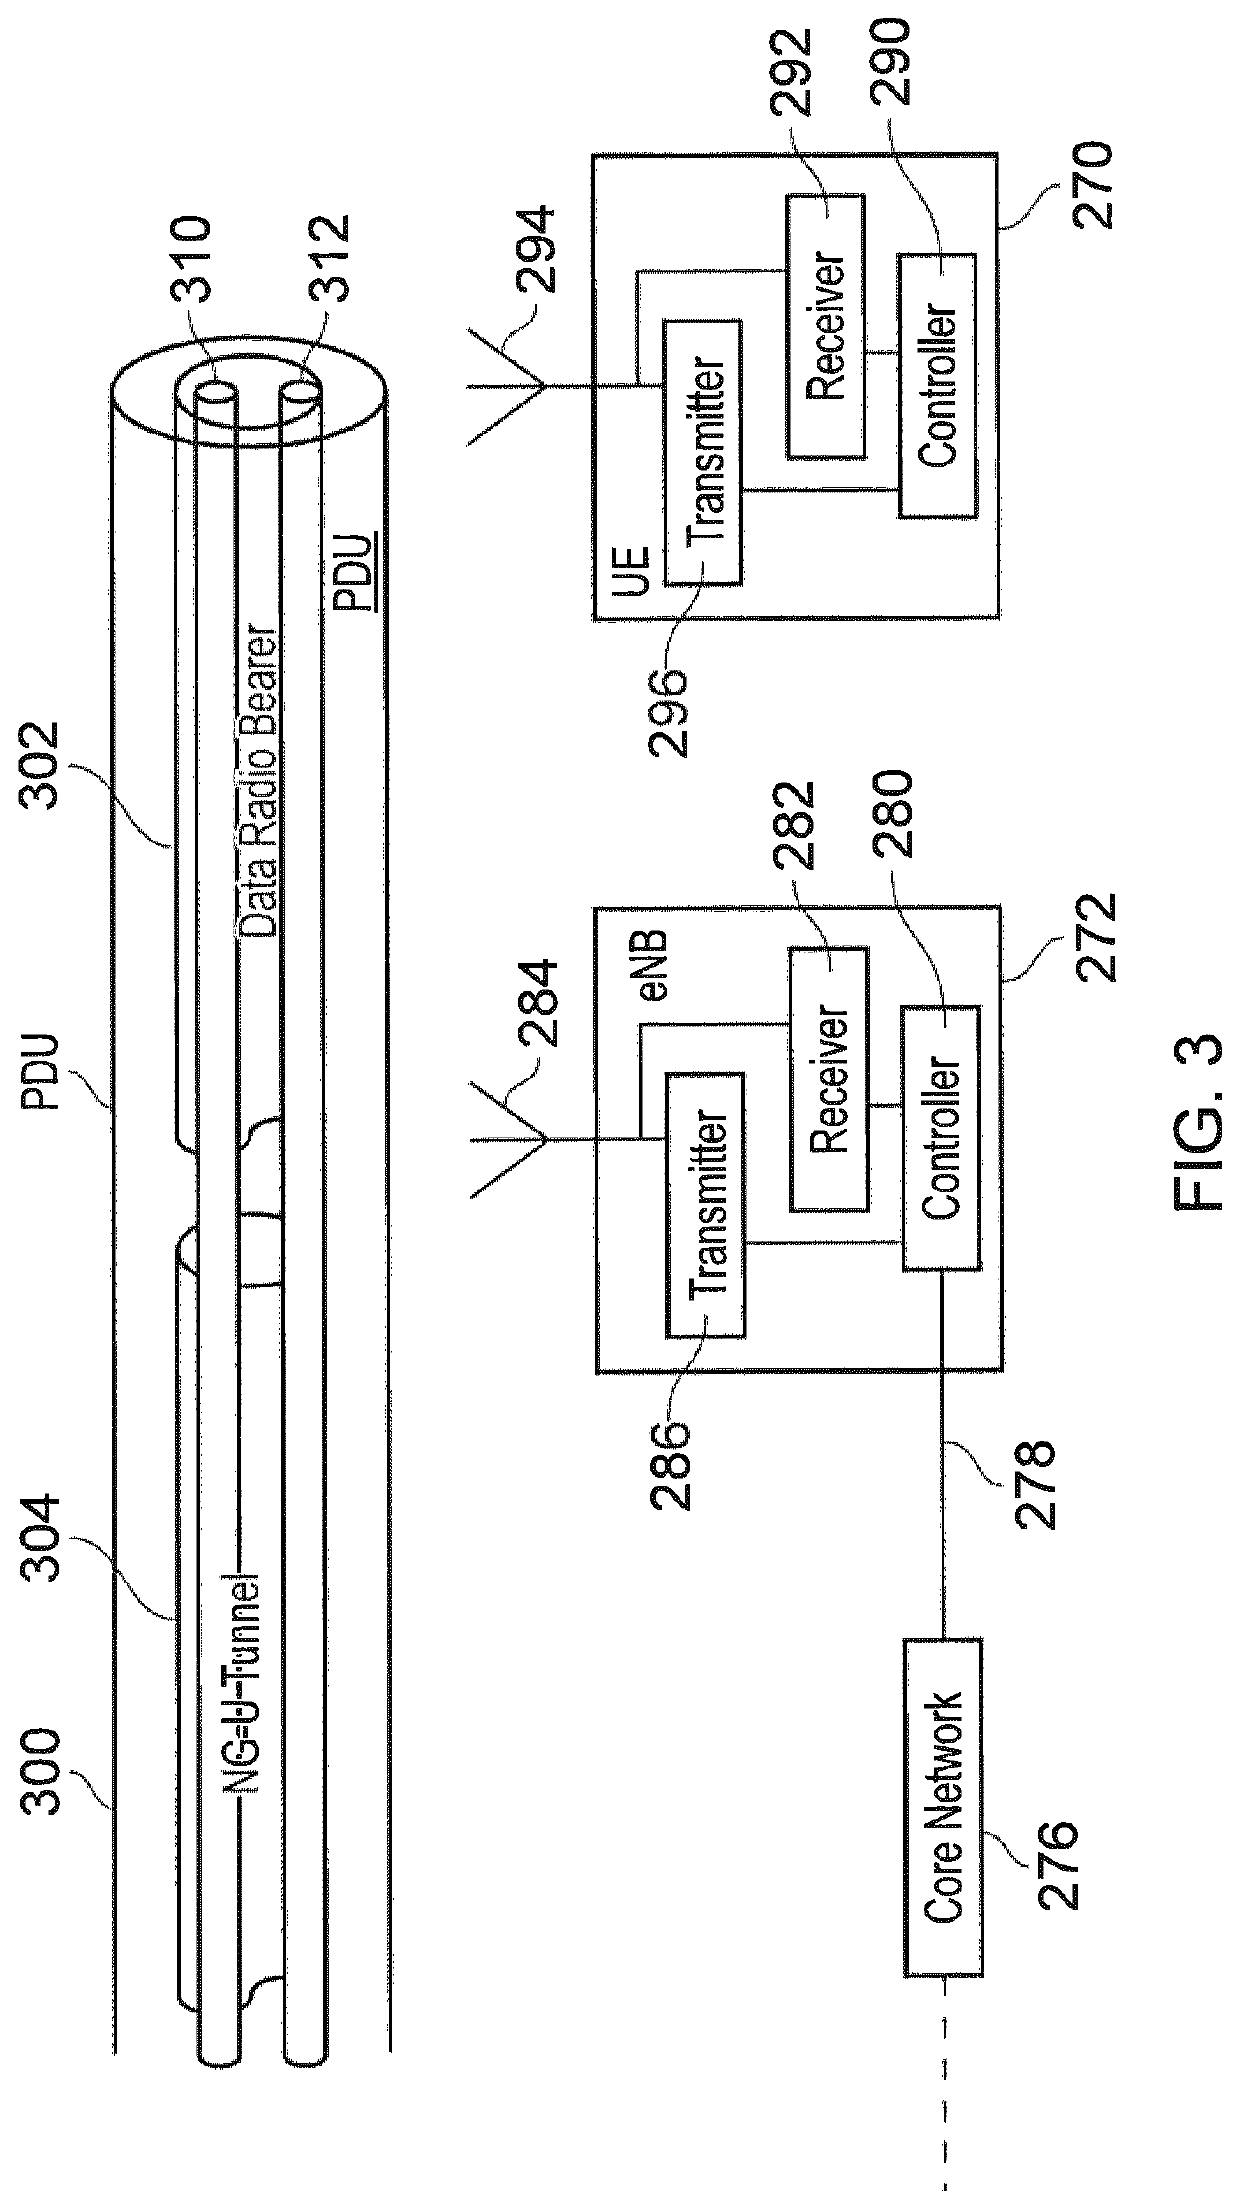 Infrastructure equipment, wireless communications networks and methods